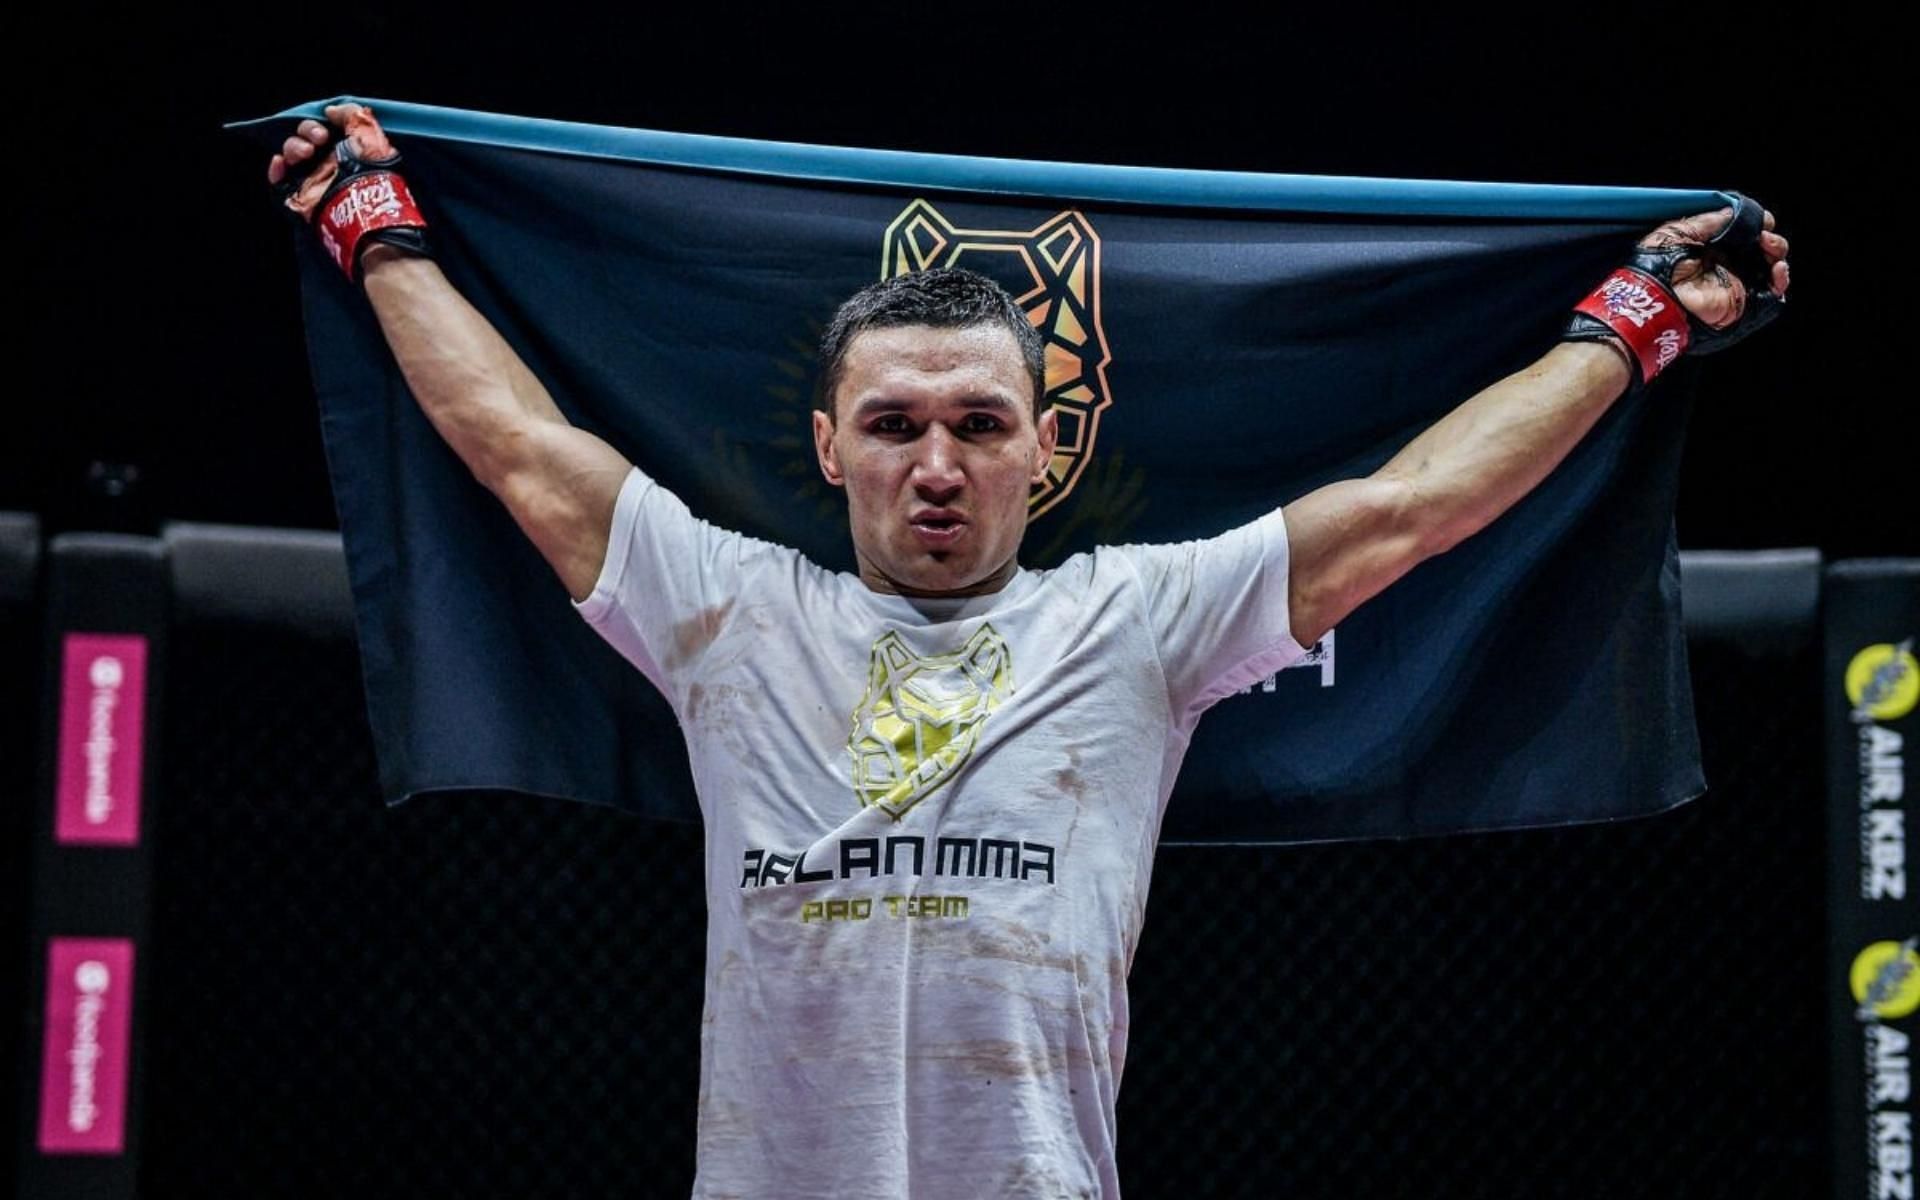 Our ONE Championship prediction sees former ONE flyweight champion Kairat &#039;The Kazakh&#039; Akhmetov winning by way of his grappling prowess. (Image courtesy of ONE Championship)